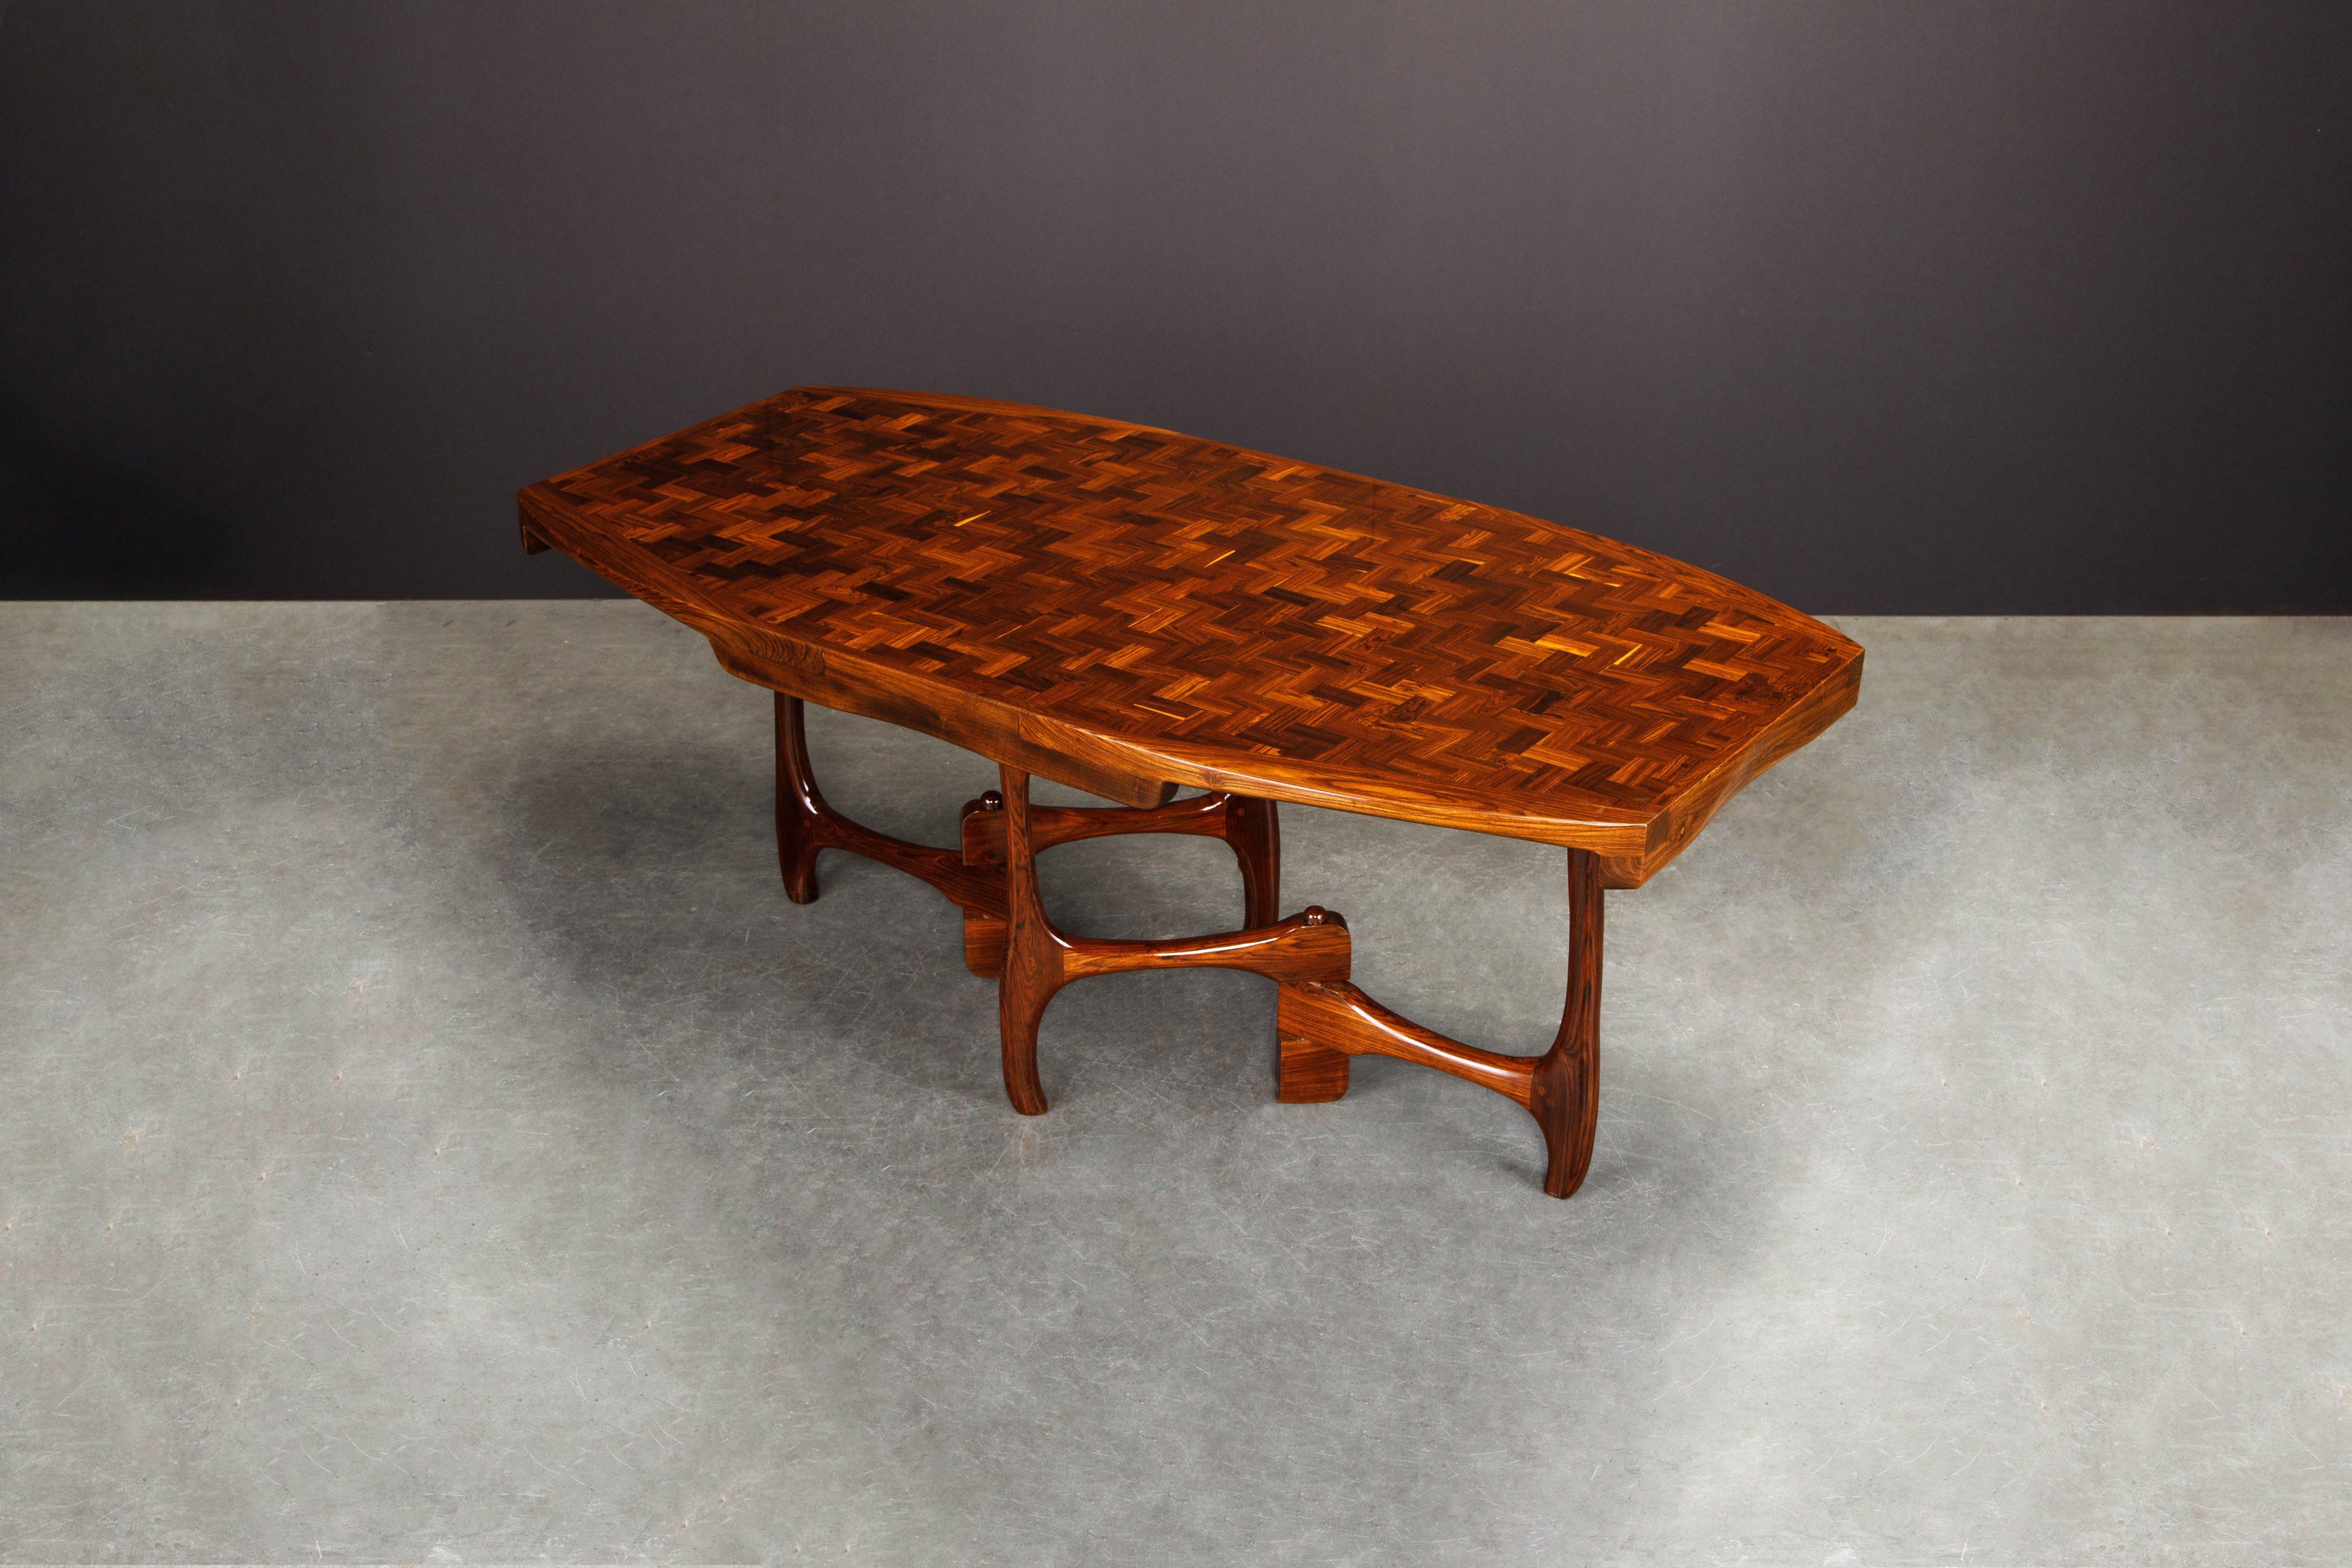 Mexican Rare Exotic Cocobolo Rosewood Dining Table by Don Shoemaker for Senal, Signed